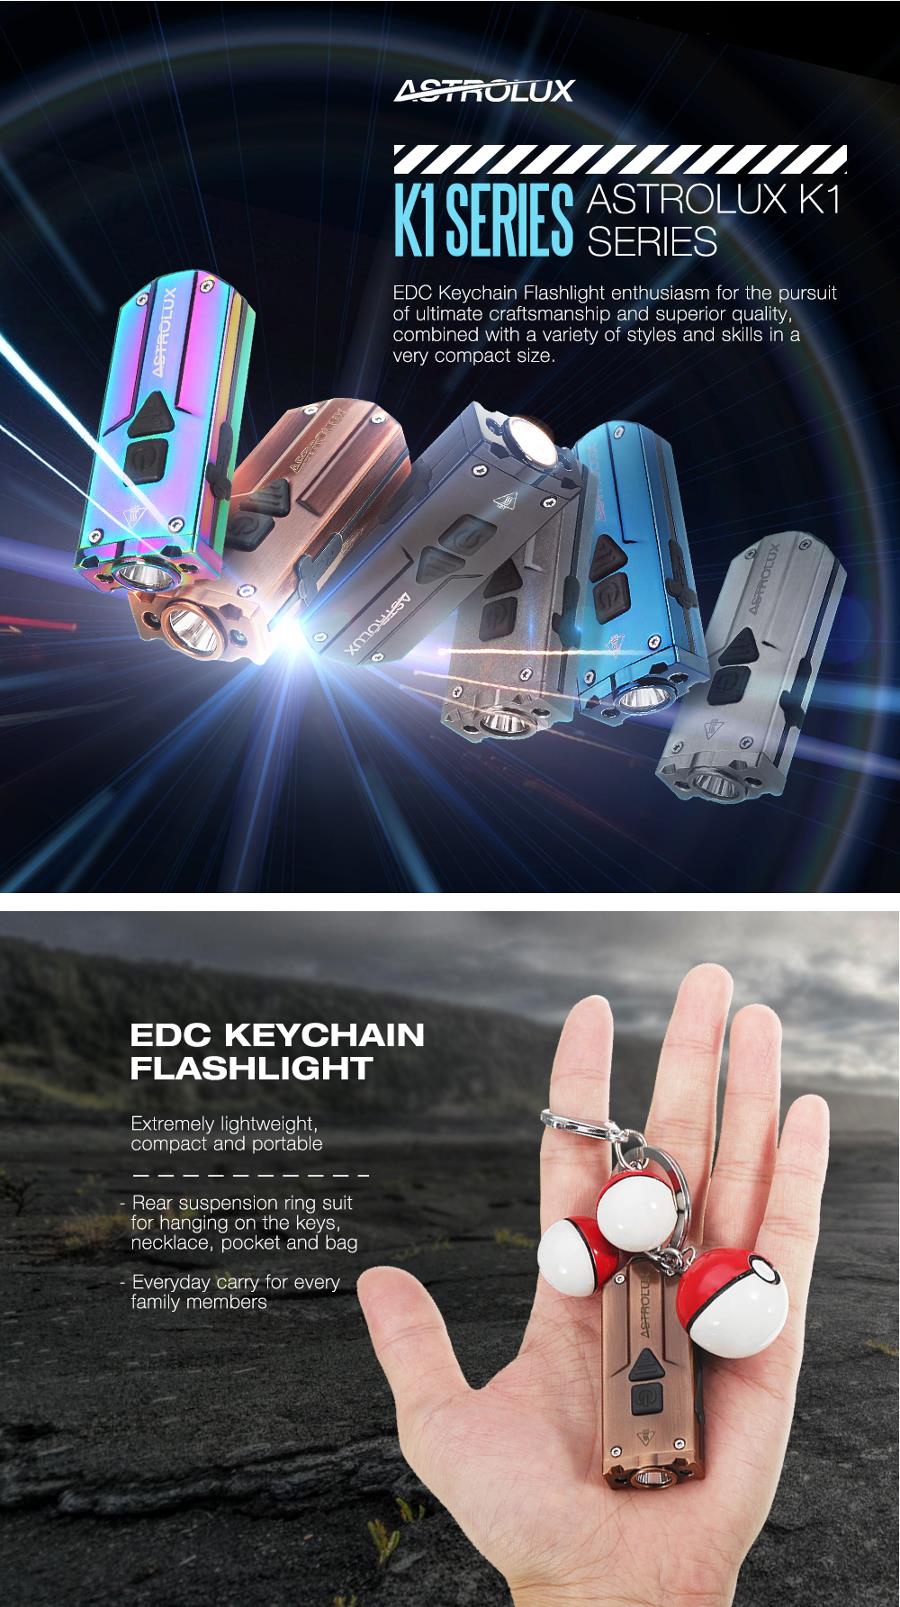 Astrolux-K1-XP-G3365nm-UVRed-LED-350LM-New-Driver-USB-Stainless-Steel-Mini-LED-Keychain-Light-1234869